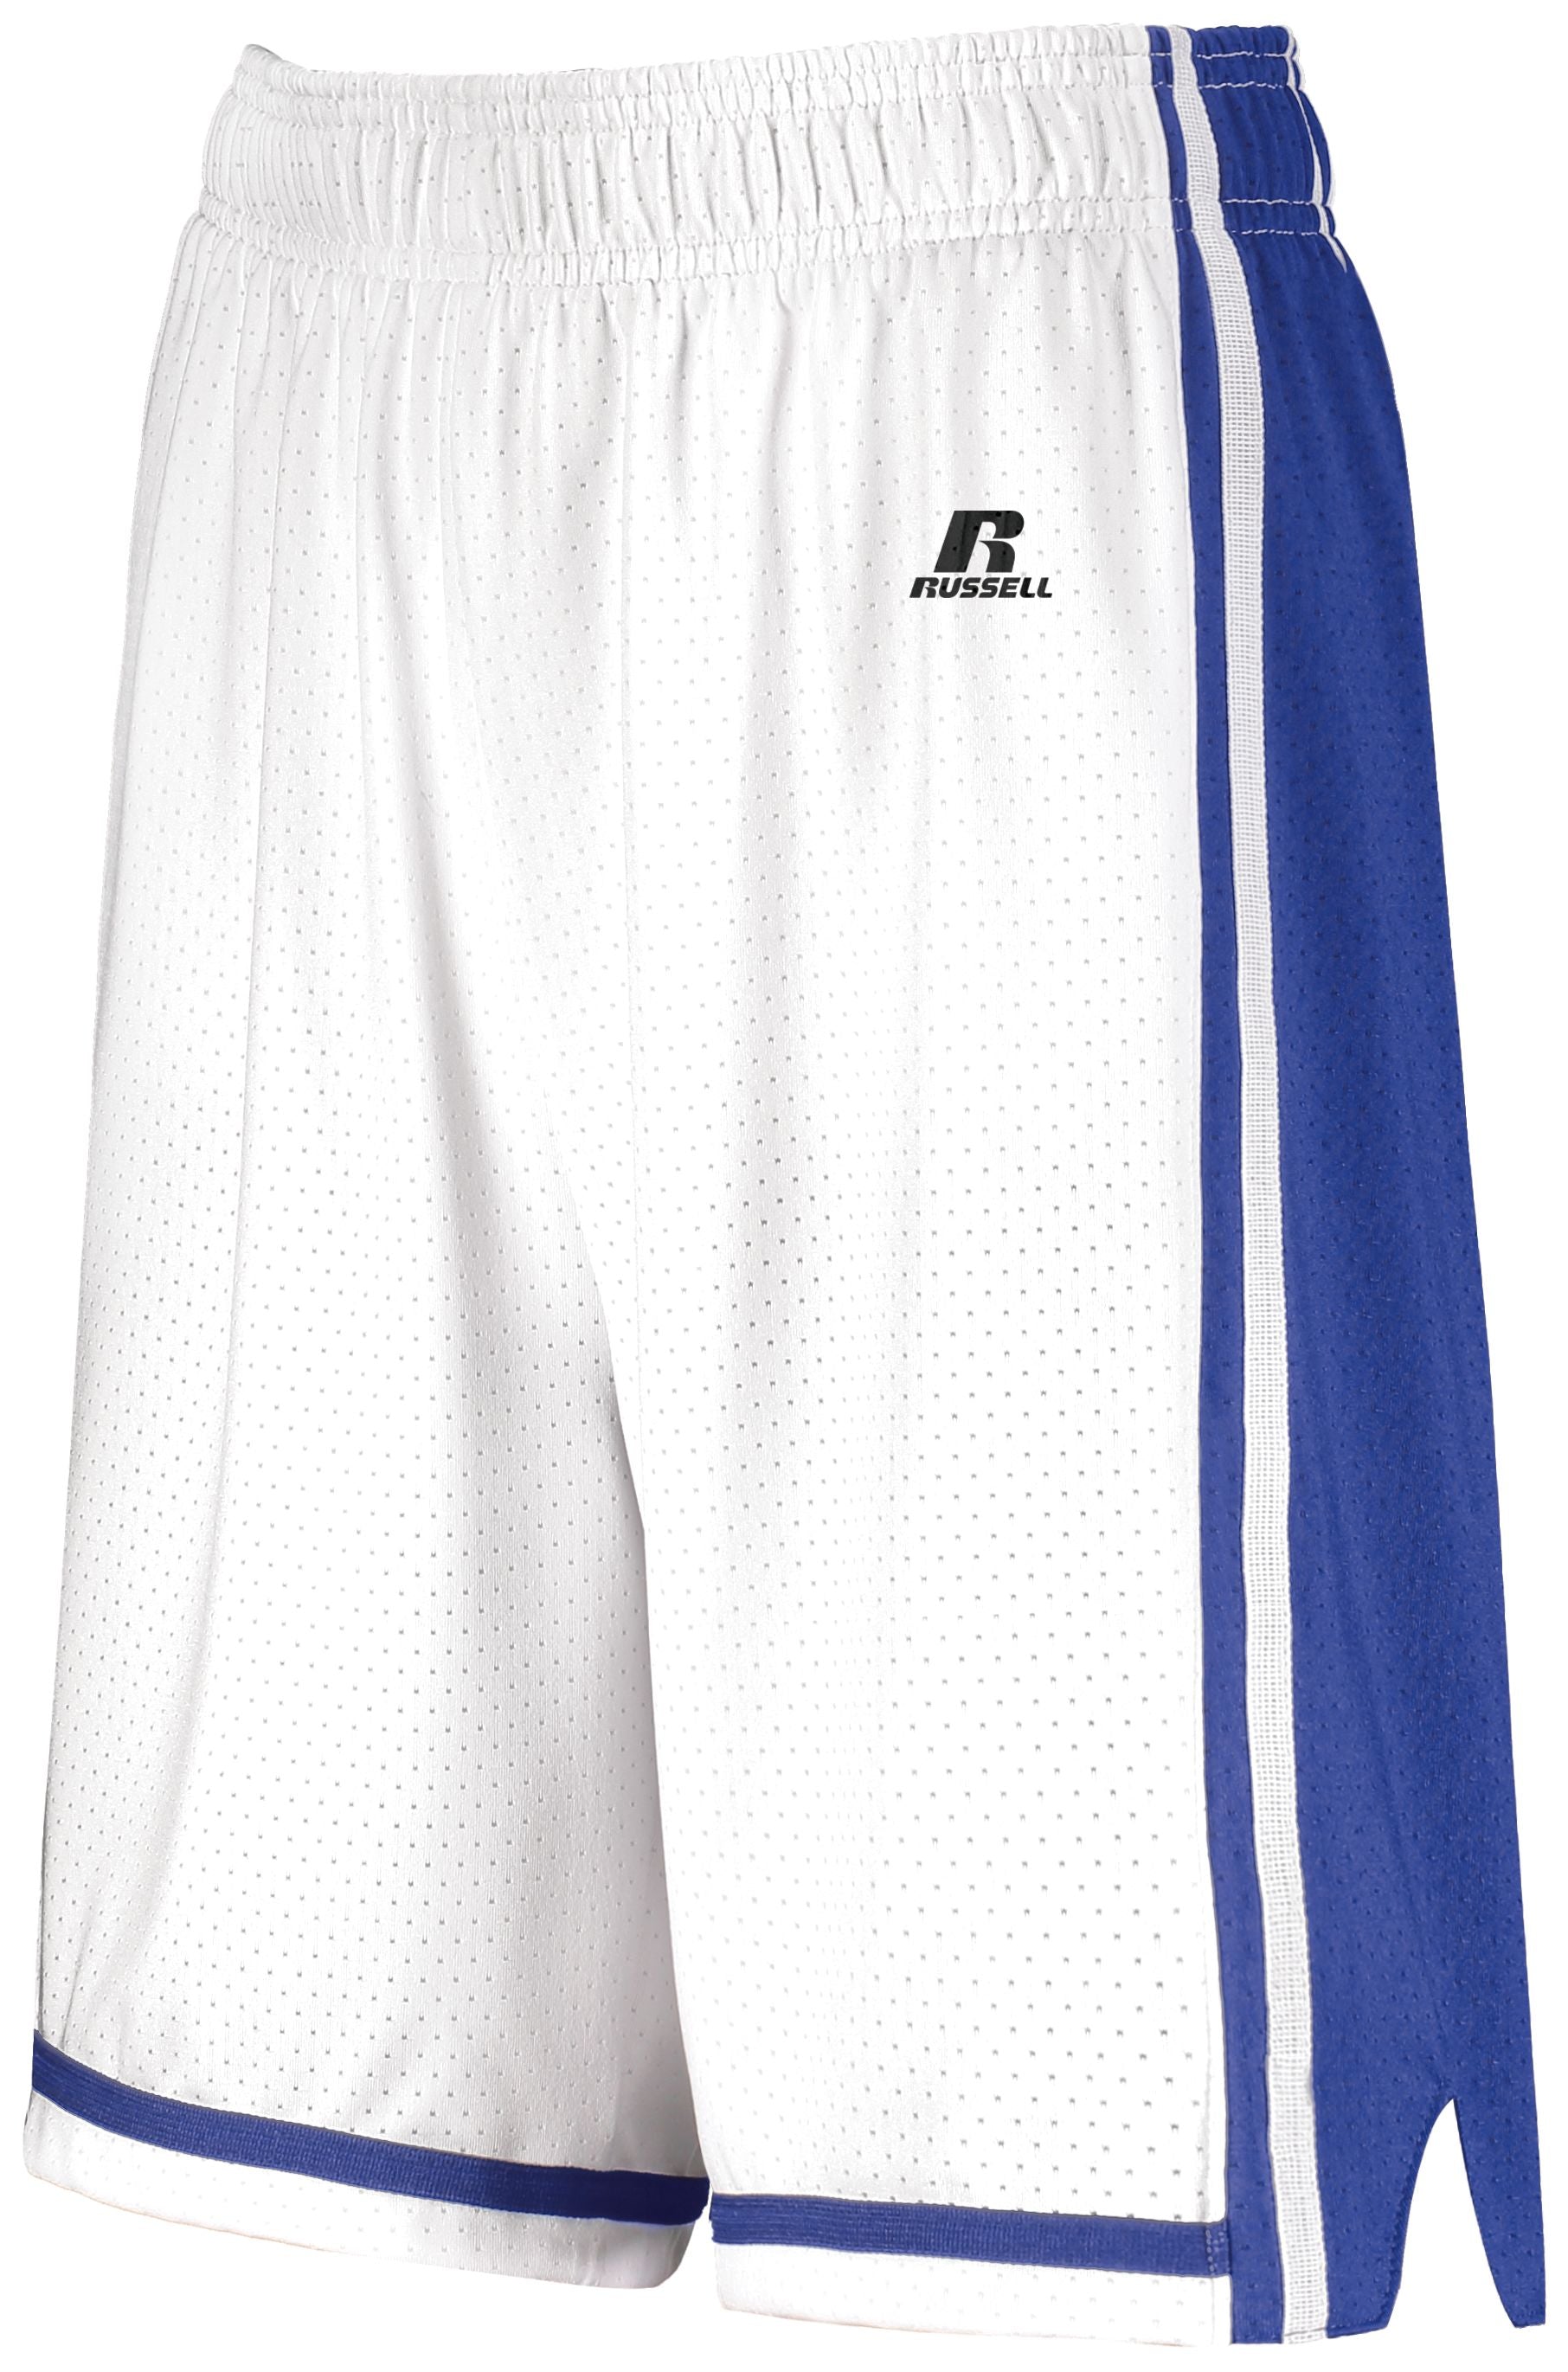 Russell Athletic Ladies Legacy Basketball Shorts in White/Royal  -Part of the Ladies, Ladies-Shorts, Basketball, Russell-Athletic-Products, All-Sports, All-Sports-1 product lines at KanaleyCreations.com